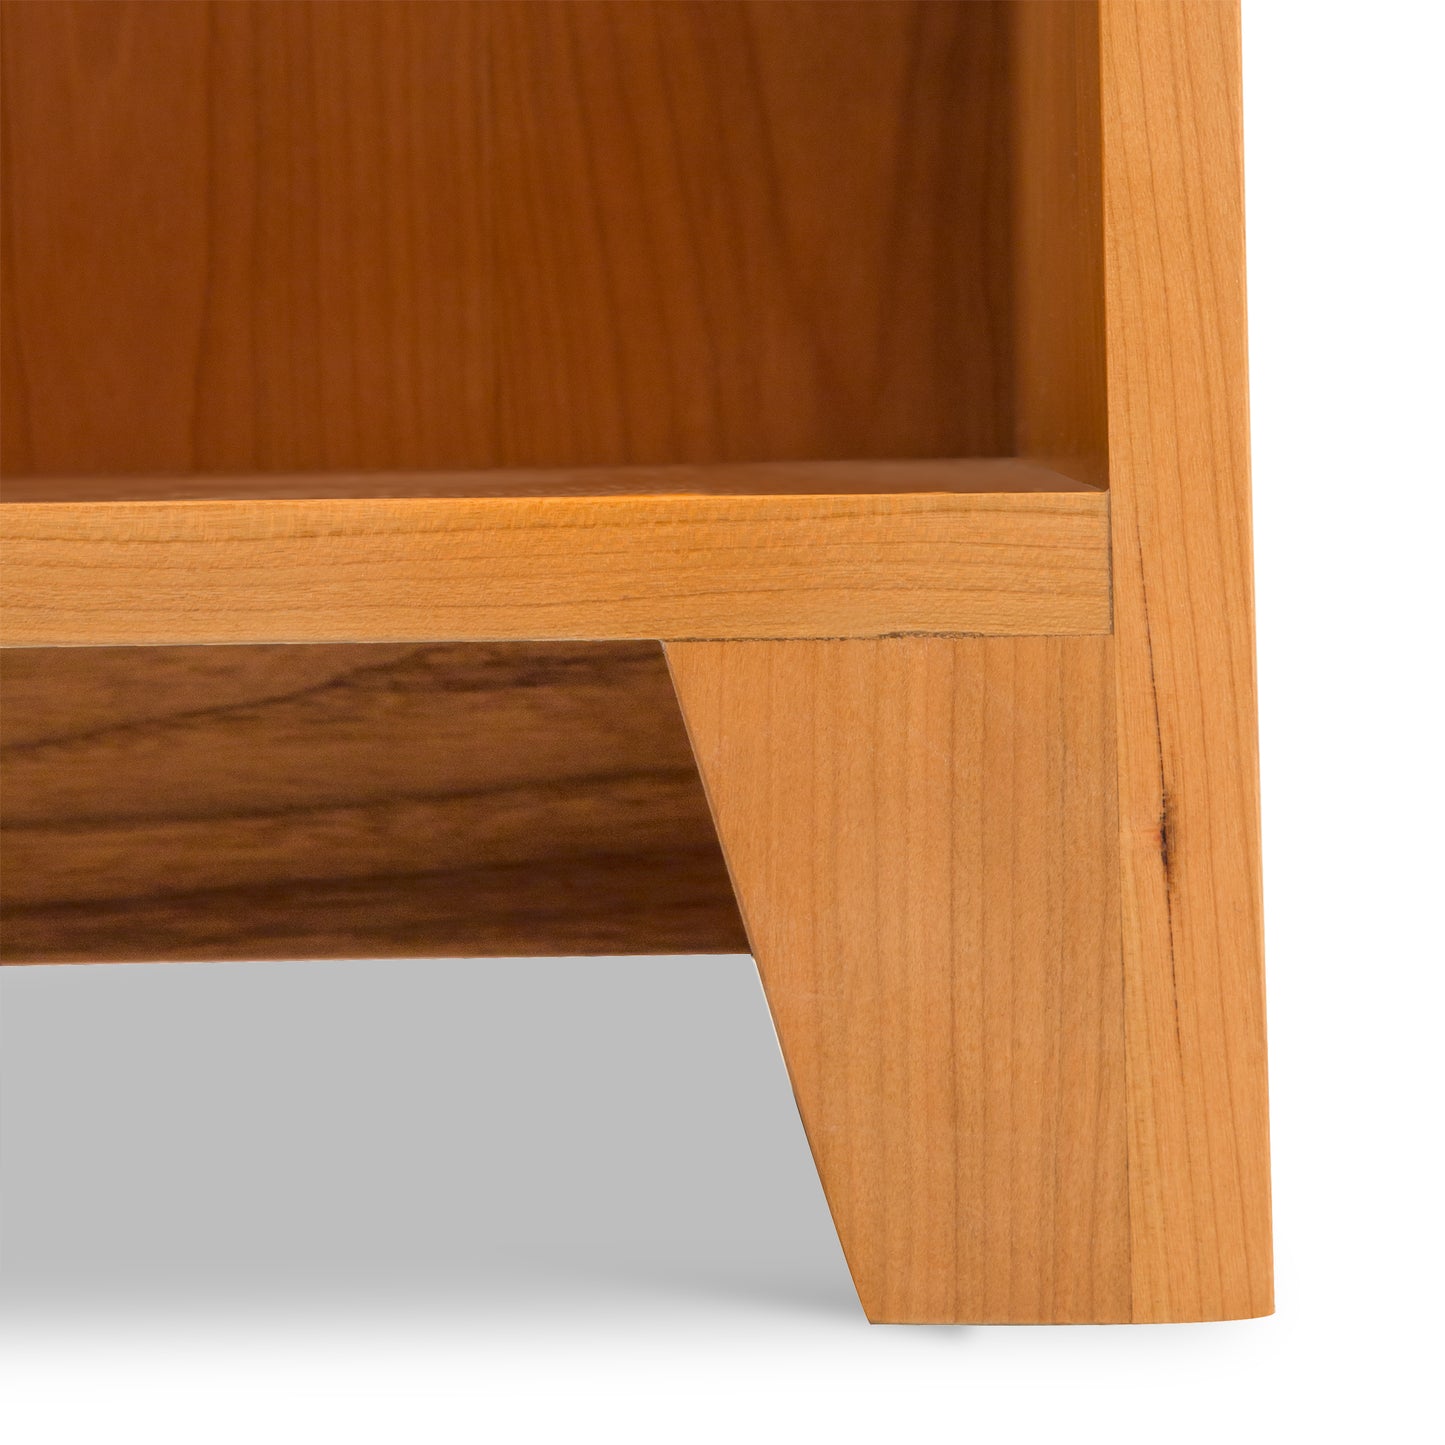 A close up of a luxury Shaker Bookcase made from Lyndon Furniture.